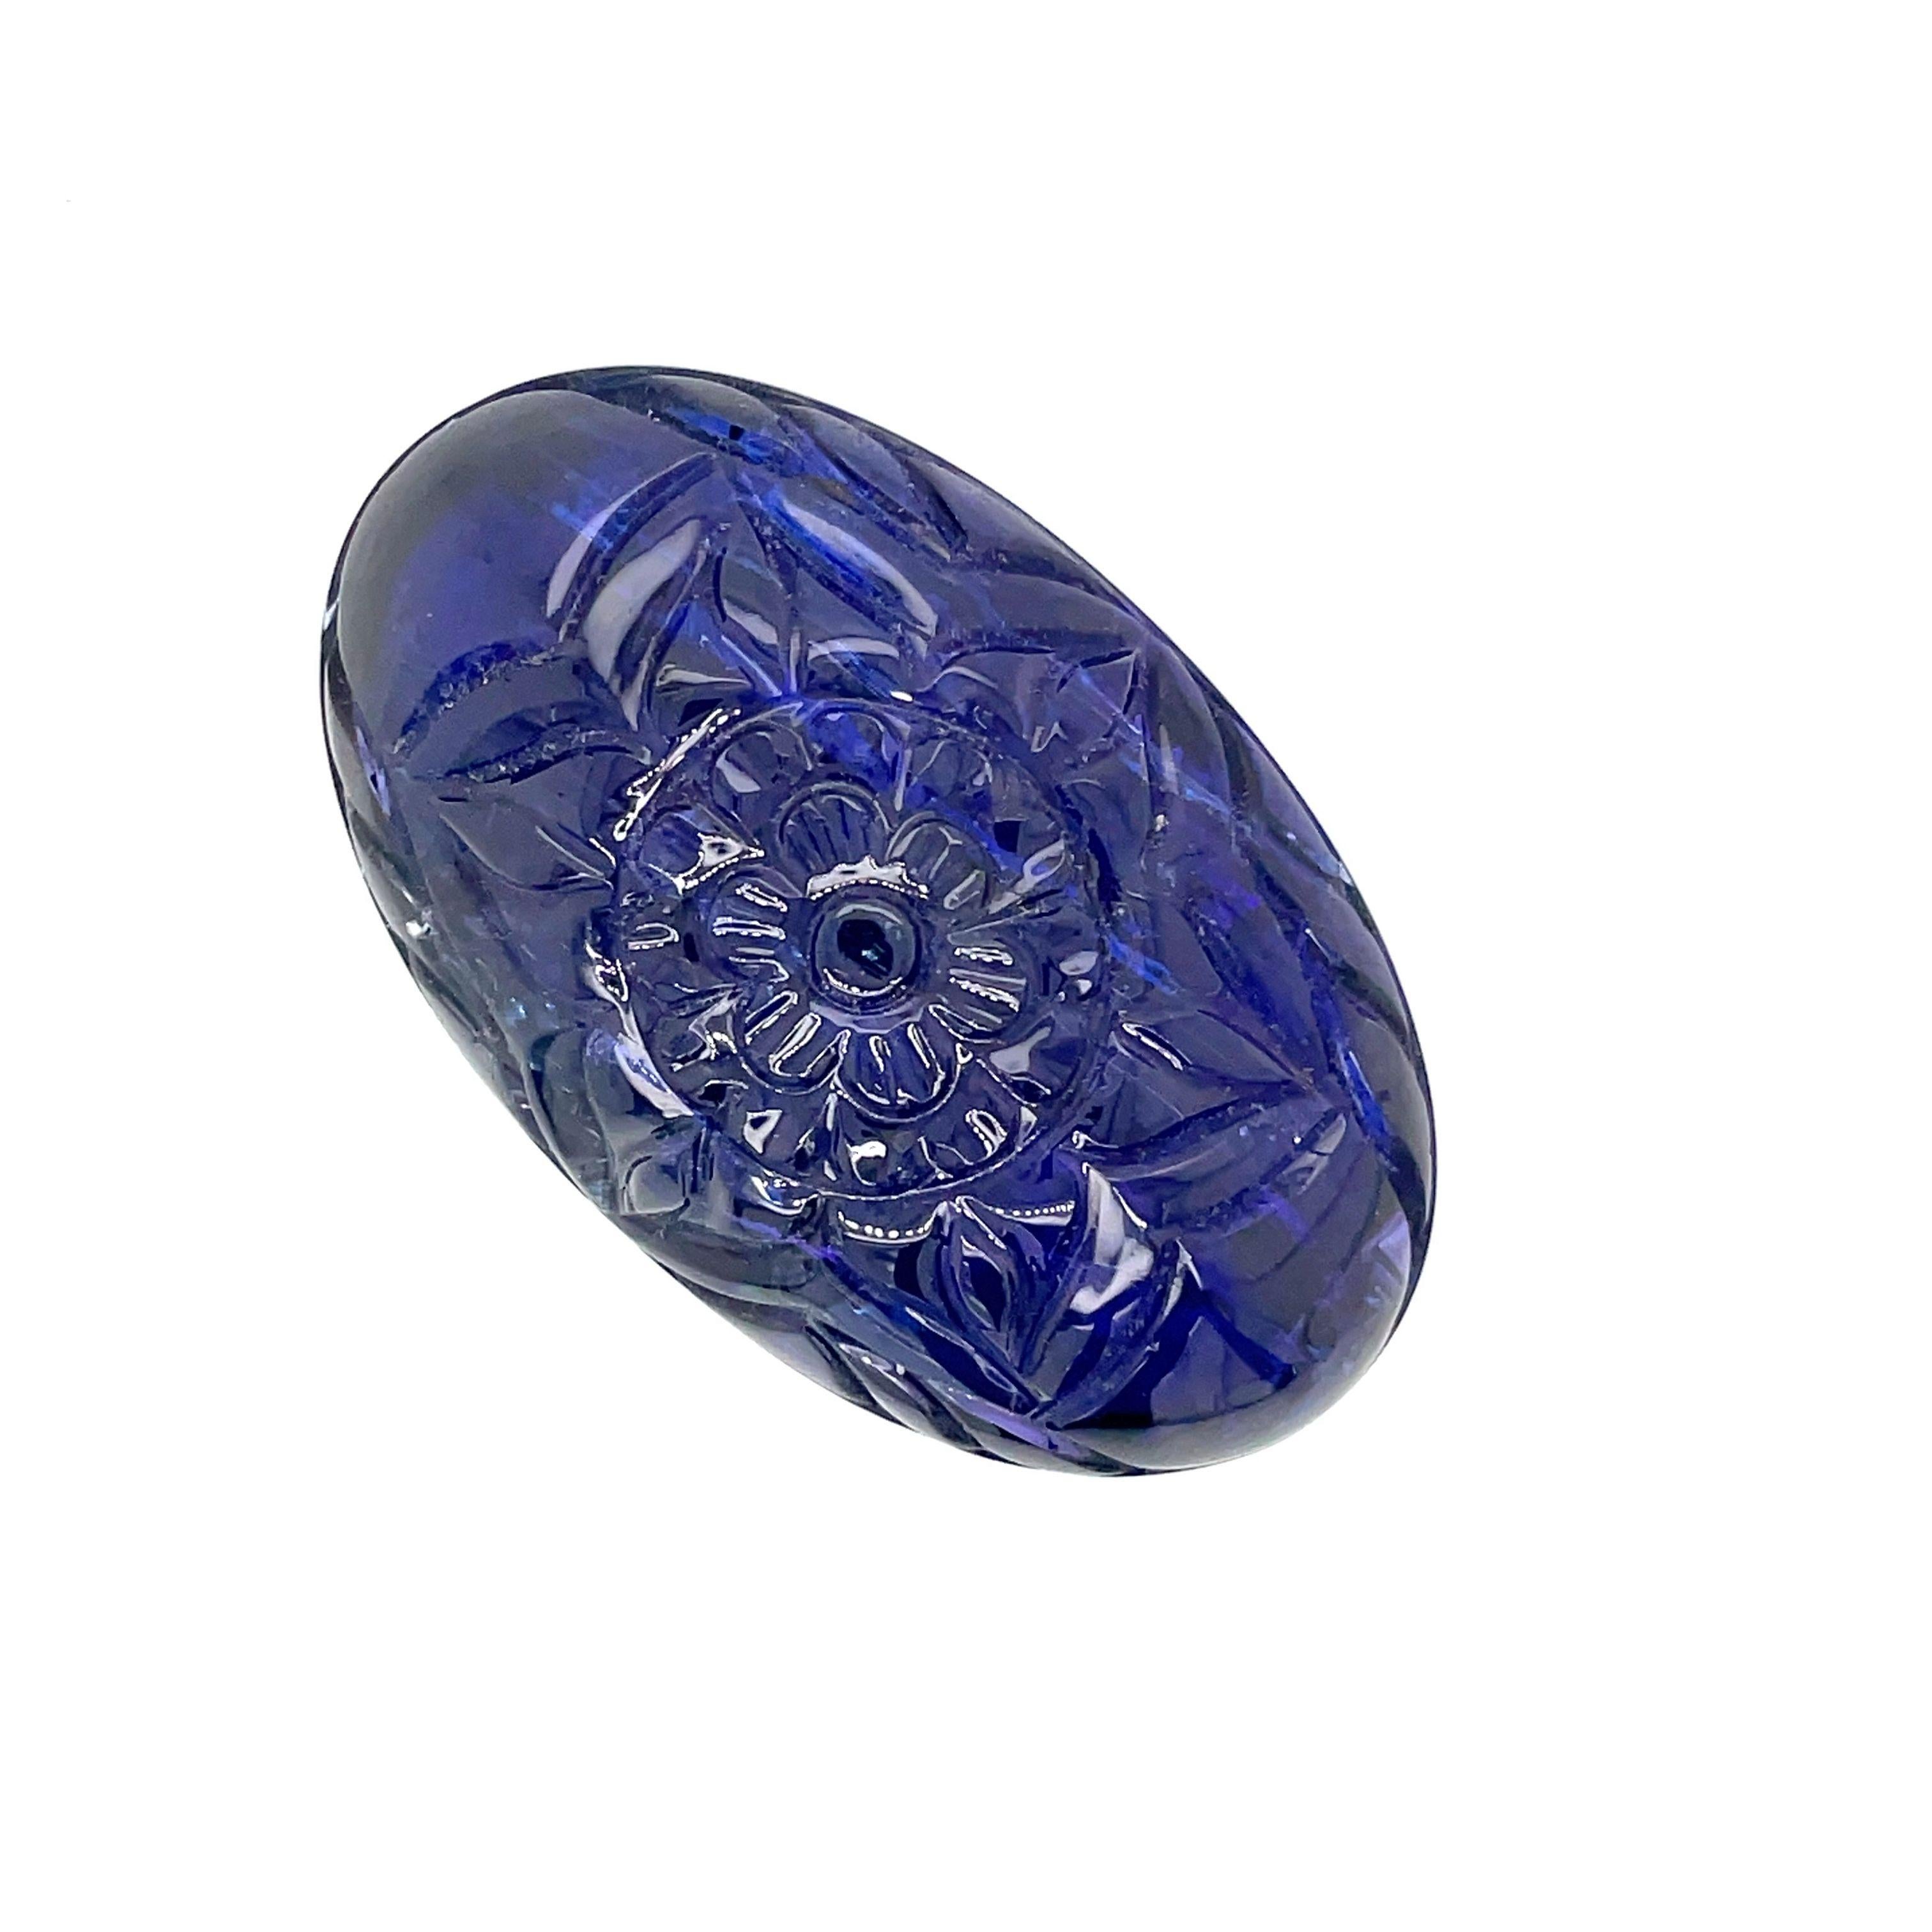 Take a look at our Carved Flower Oval Tanzanite, weighing 178.33 cts. and embrace the spirit of blossoming beauty. 

This stunning piece of art is crafted to mirror the vibrant beauty of nature.

The lovely flower arrangement on this stone evokes